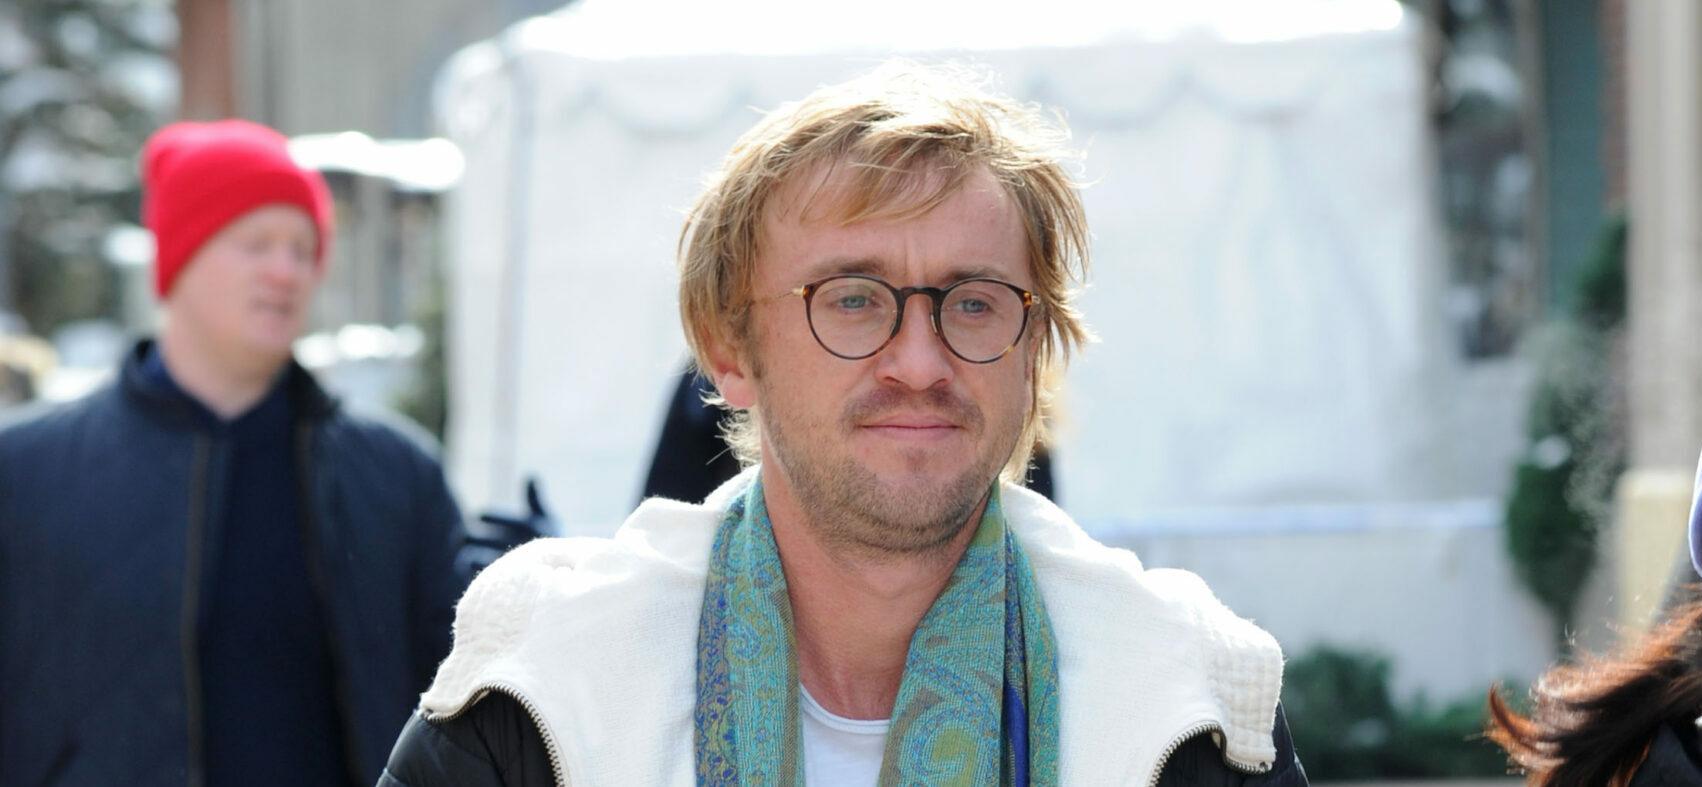 Tom Felton fashions a long scarf as he promotes film 'Ophelia' at Sundance. The Harry Potter star was seen promoting his film at the festival in Park City, Utah. 22 Jan 2018 Pictured: Tom Felton. Photo credit: Atlantic Images/ MEGA TheMegaAgency.com +1 888 505 6342 (Mega Agency TagID: MEGA150858_002.jpg) [Photo via Mega Agency]